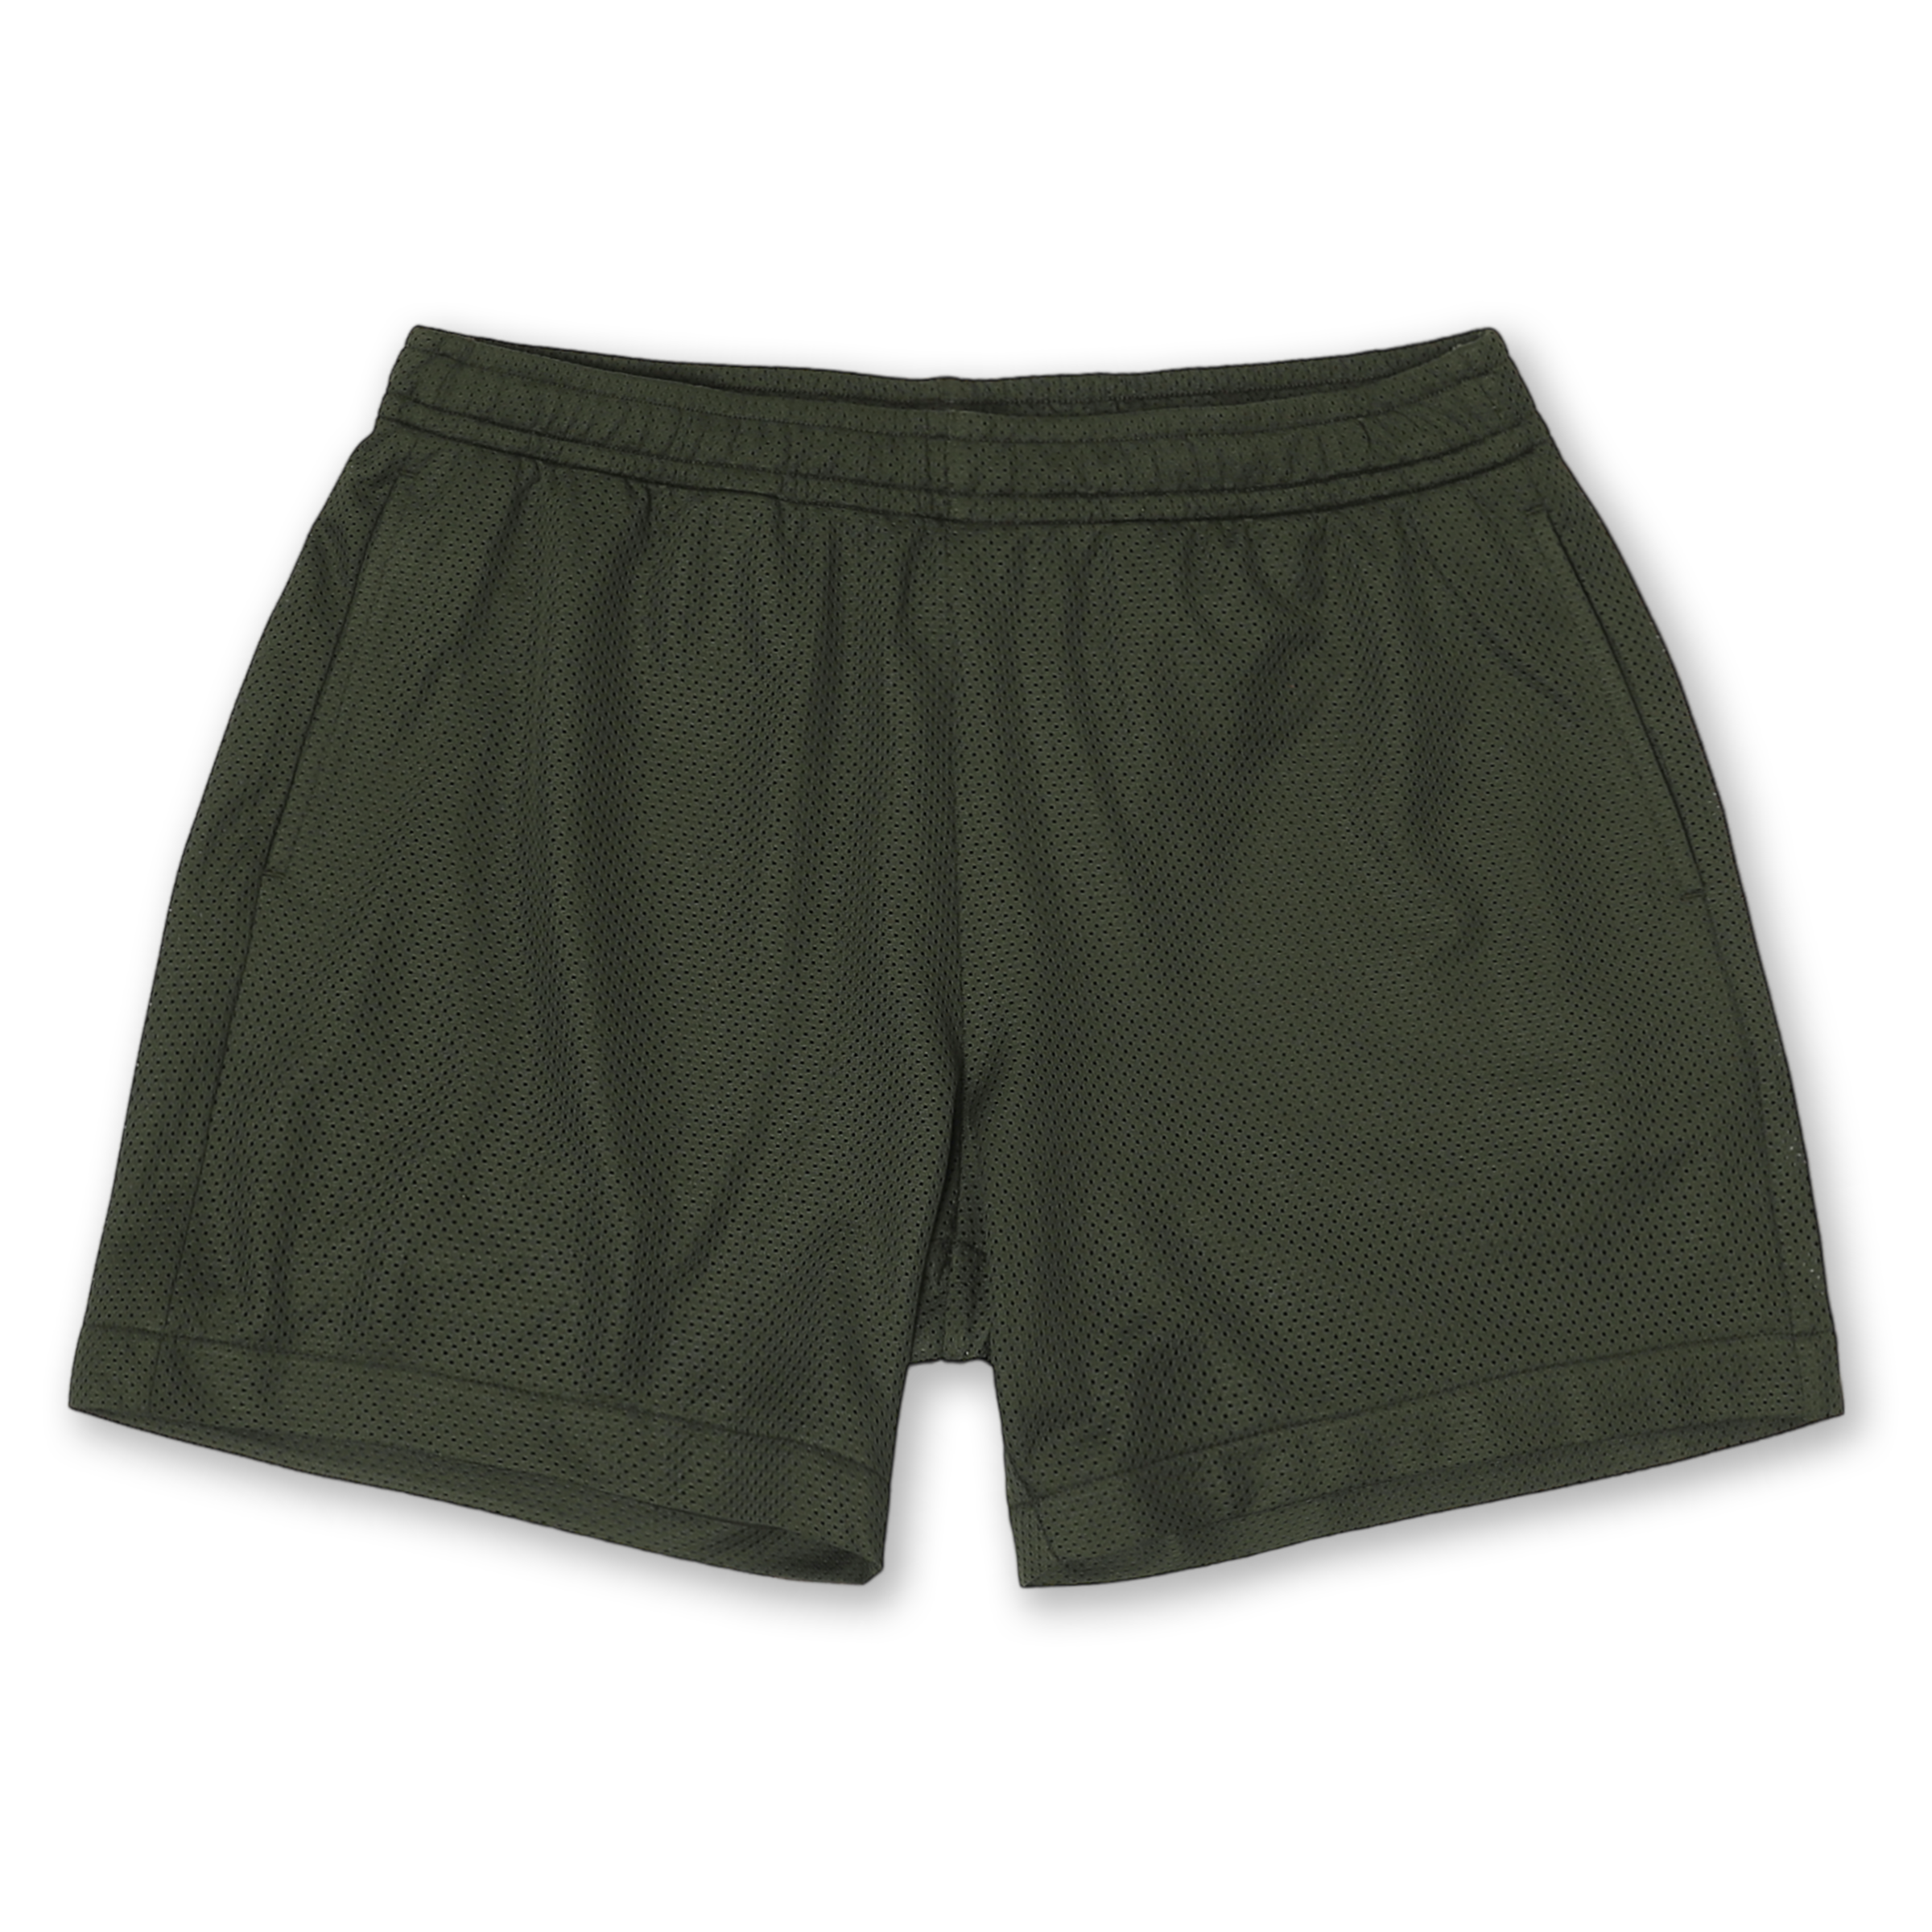 Mesh Short 5.5" Military Green with elastic waistband, two side seam pockets, and black drawstring